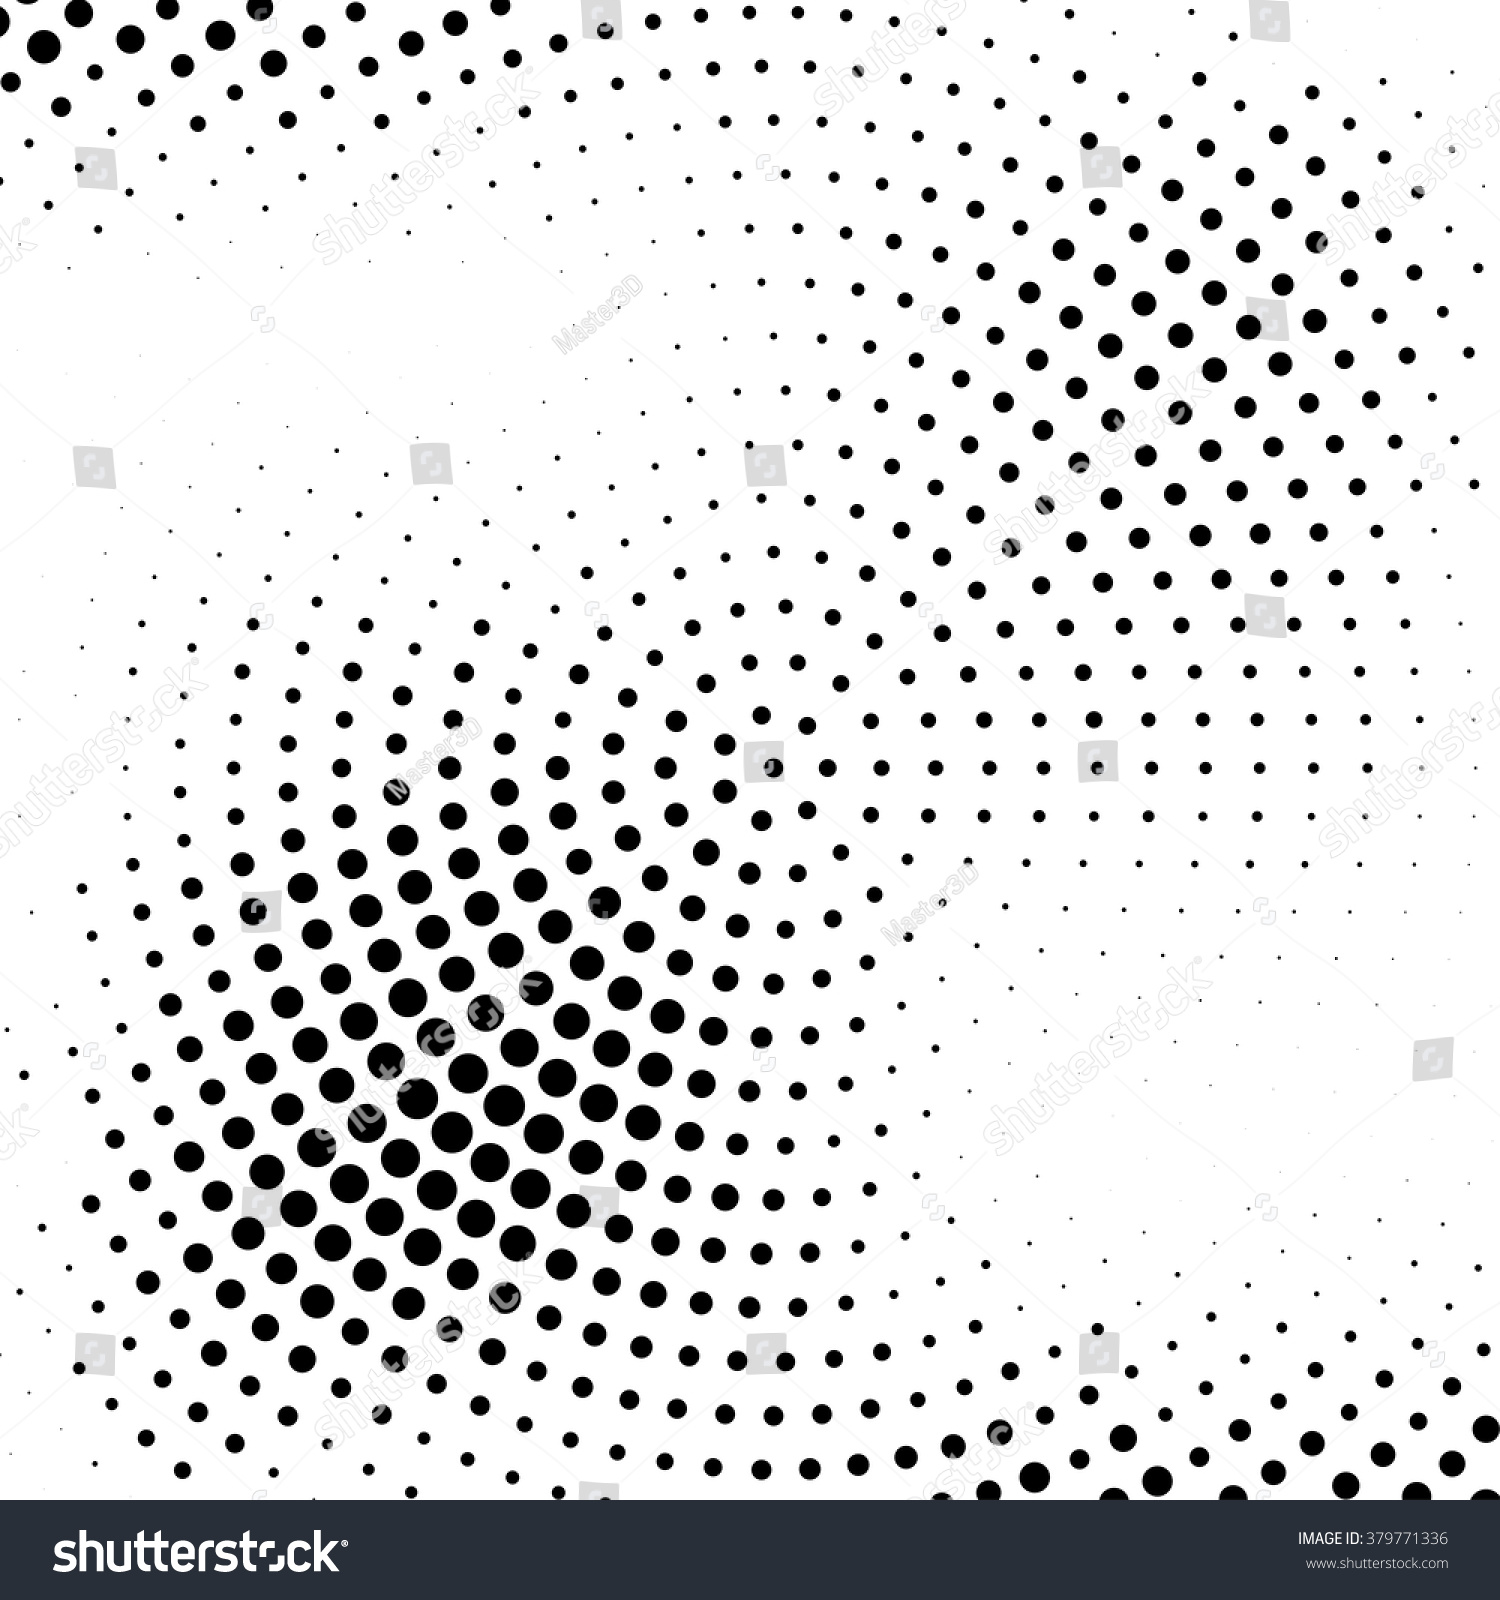 Abstract Dotted Background Vector Pattern Halftone Stock Vector ...